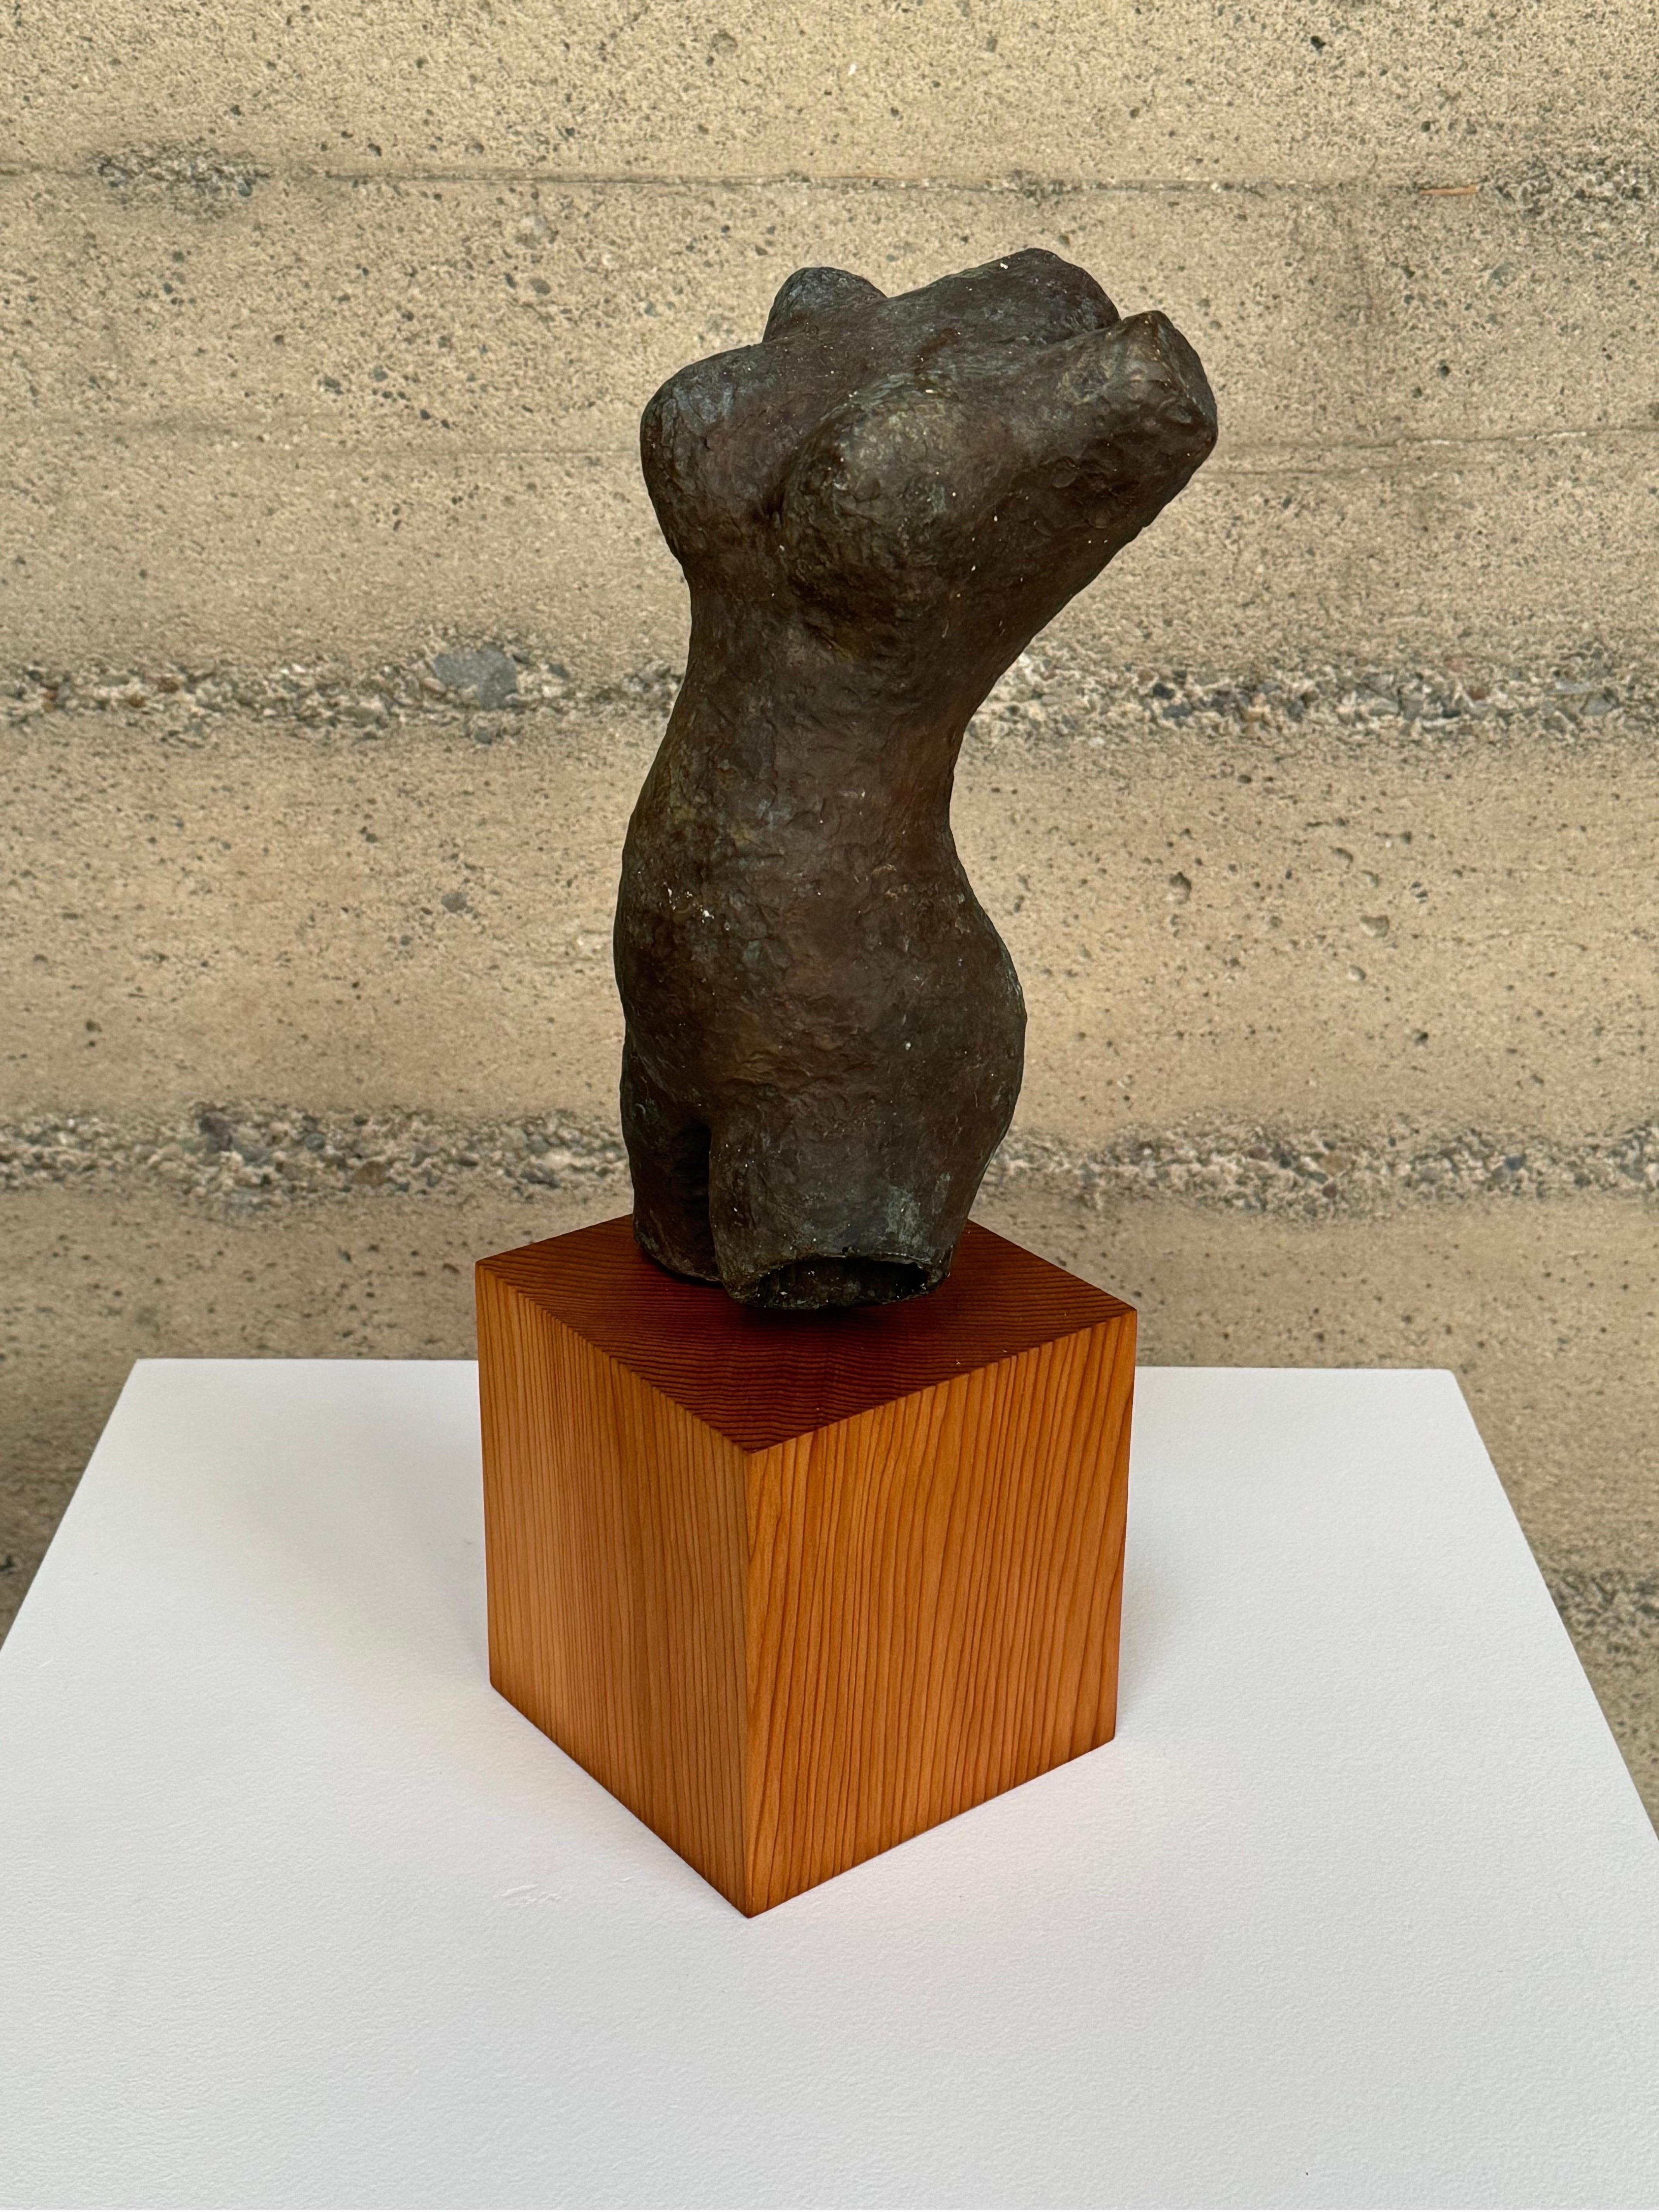 Hand-Crafted Abstract Figurative Bronze Sculpture Circa 1970s